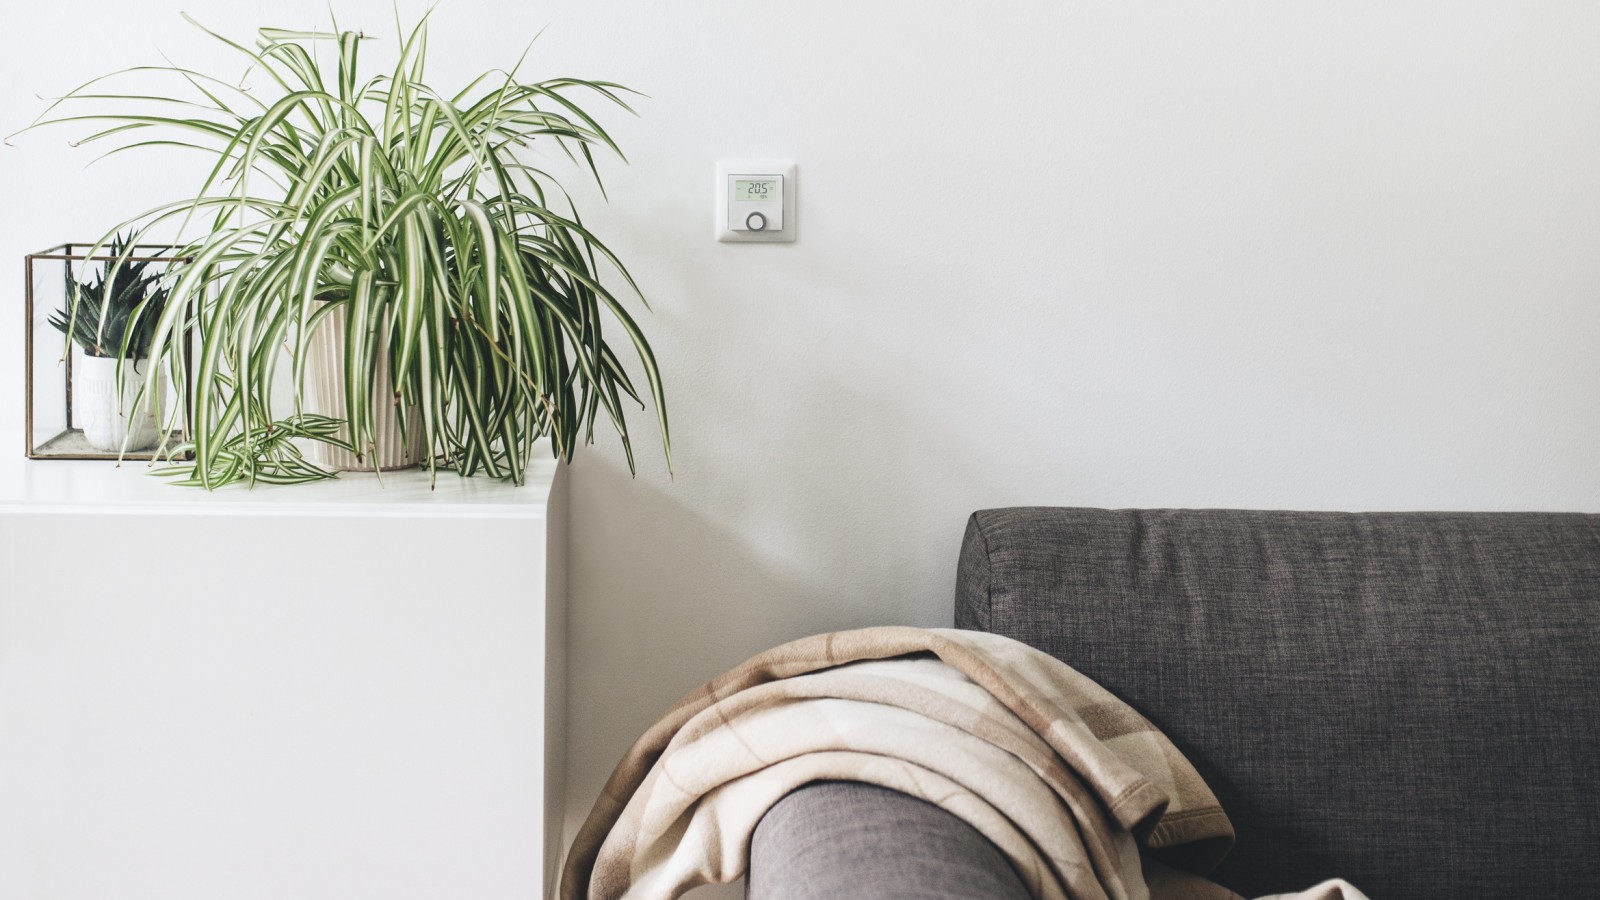 Bosch smart thermostat on a wall in a living room environment